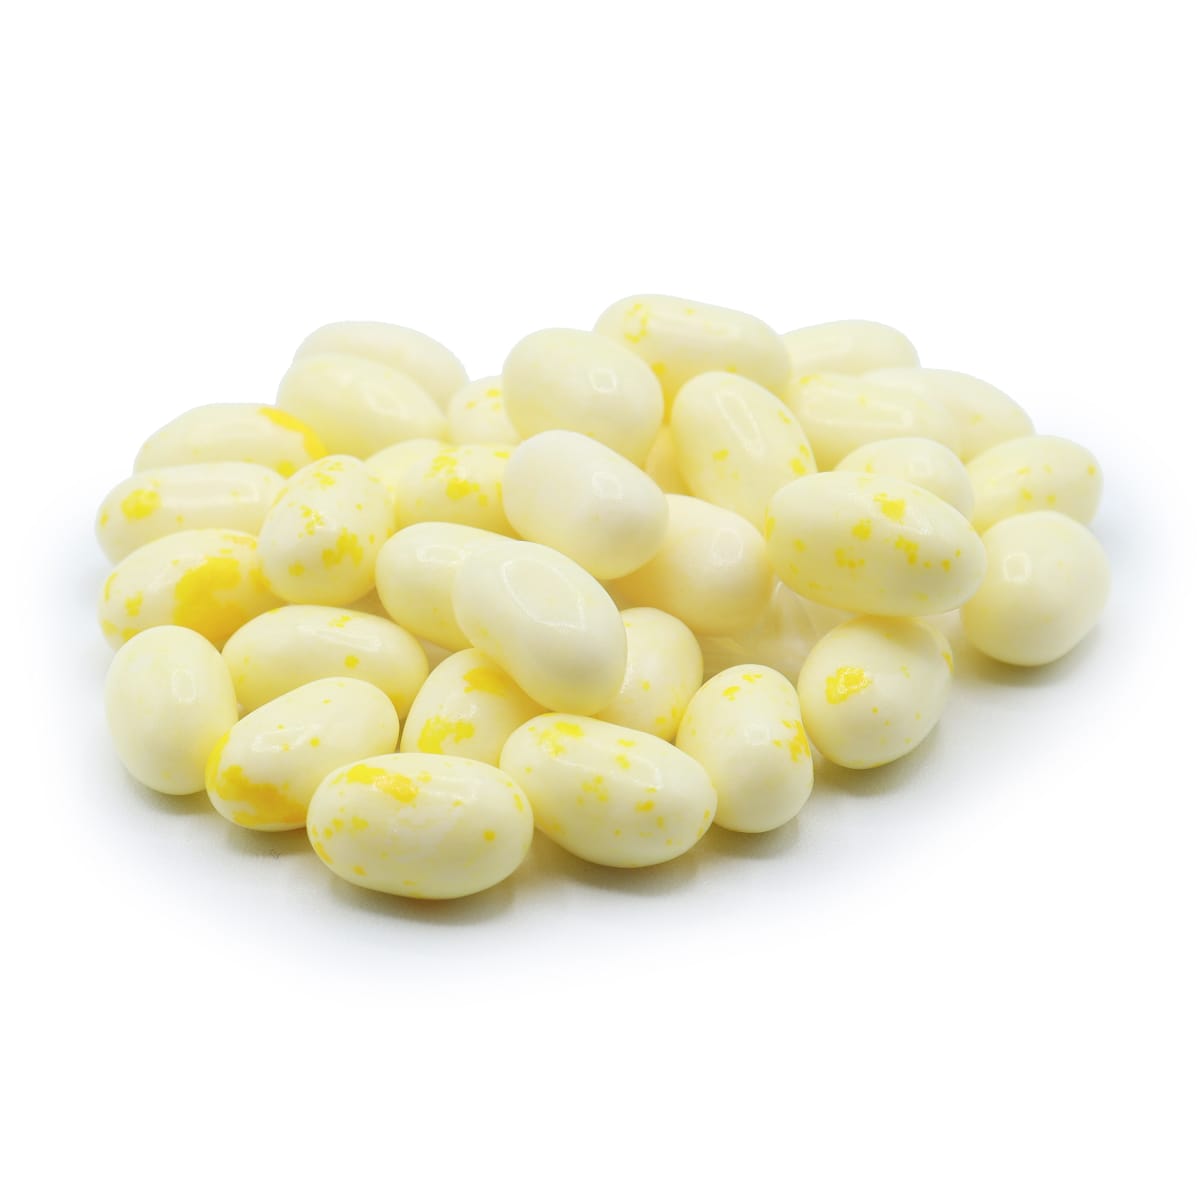 Jelly Belly Buttered Popcorn (Jelly Beans)